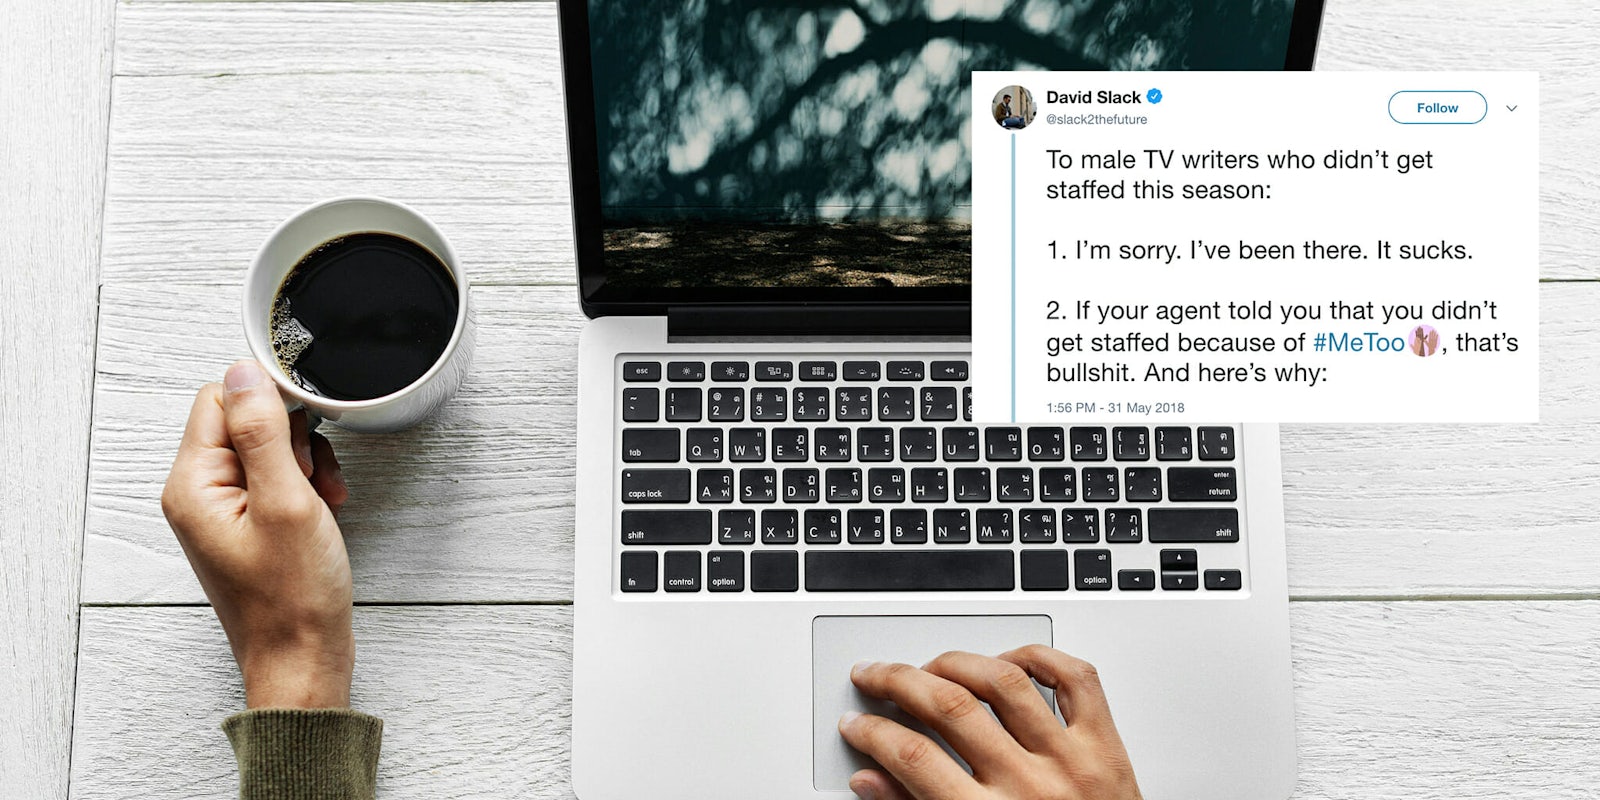 TV writer David Slack wrote a Twitter thread explaining why men who don't get writing jobs shouldn't blame #MeToo.